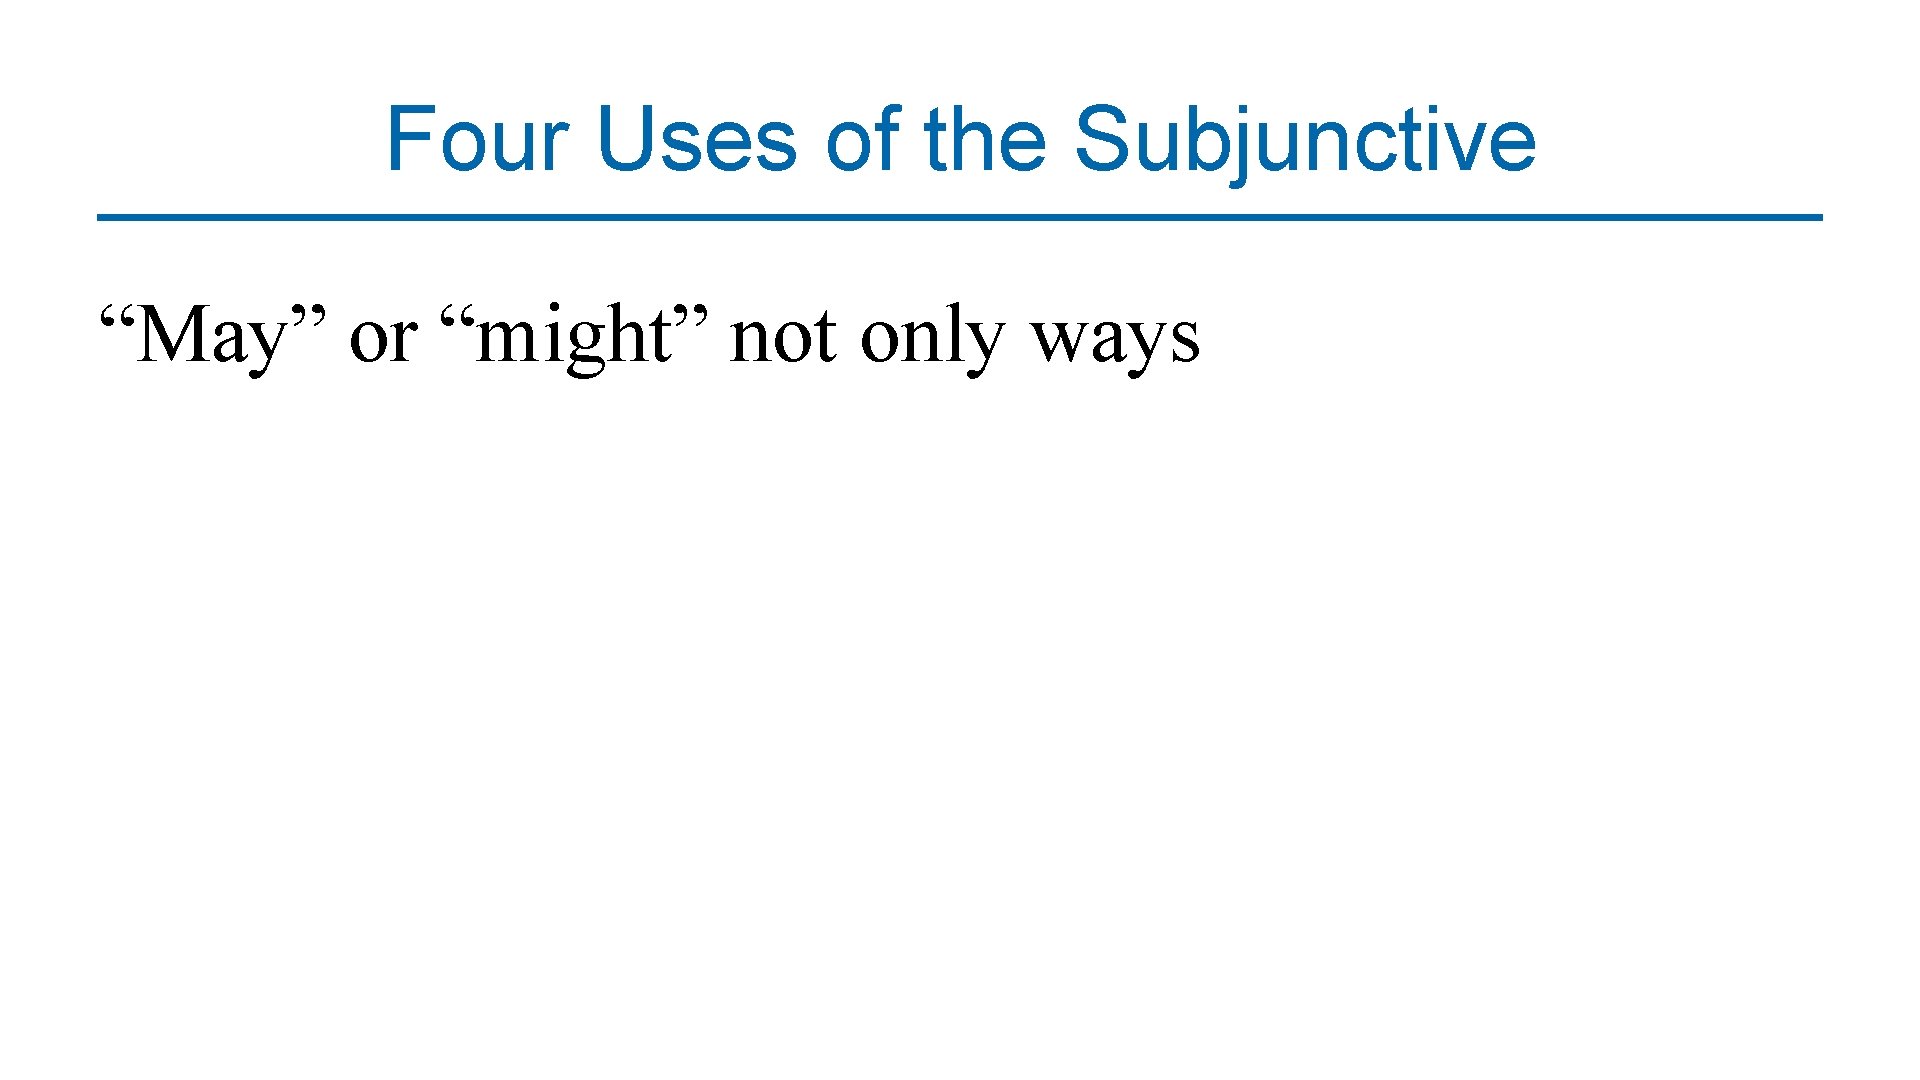 Four Uses of the Subjunctive “May” or “might” not only ways 